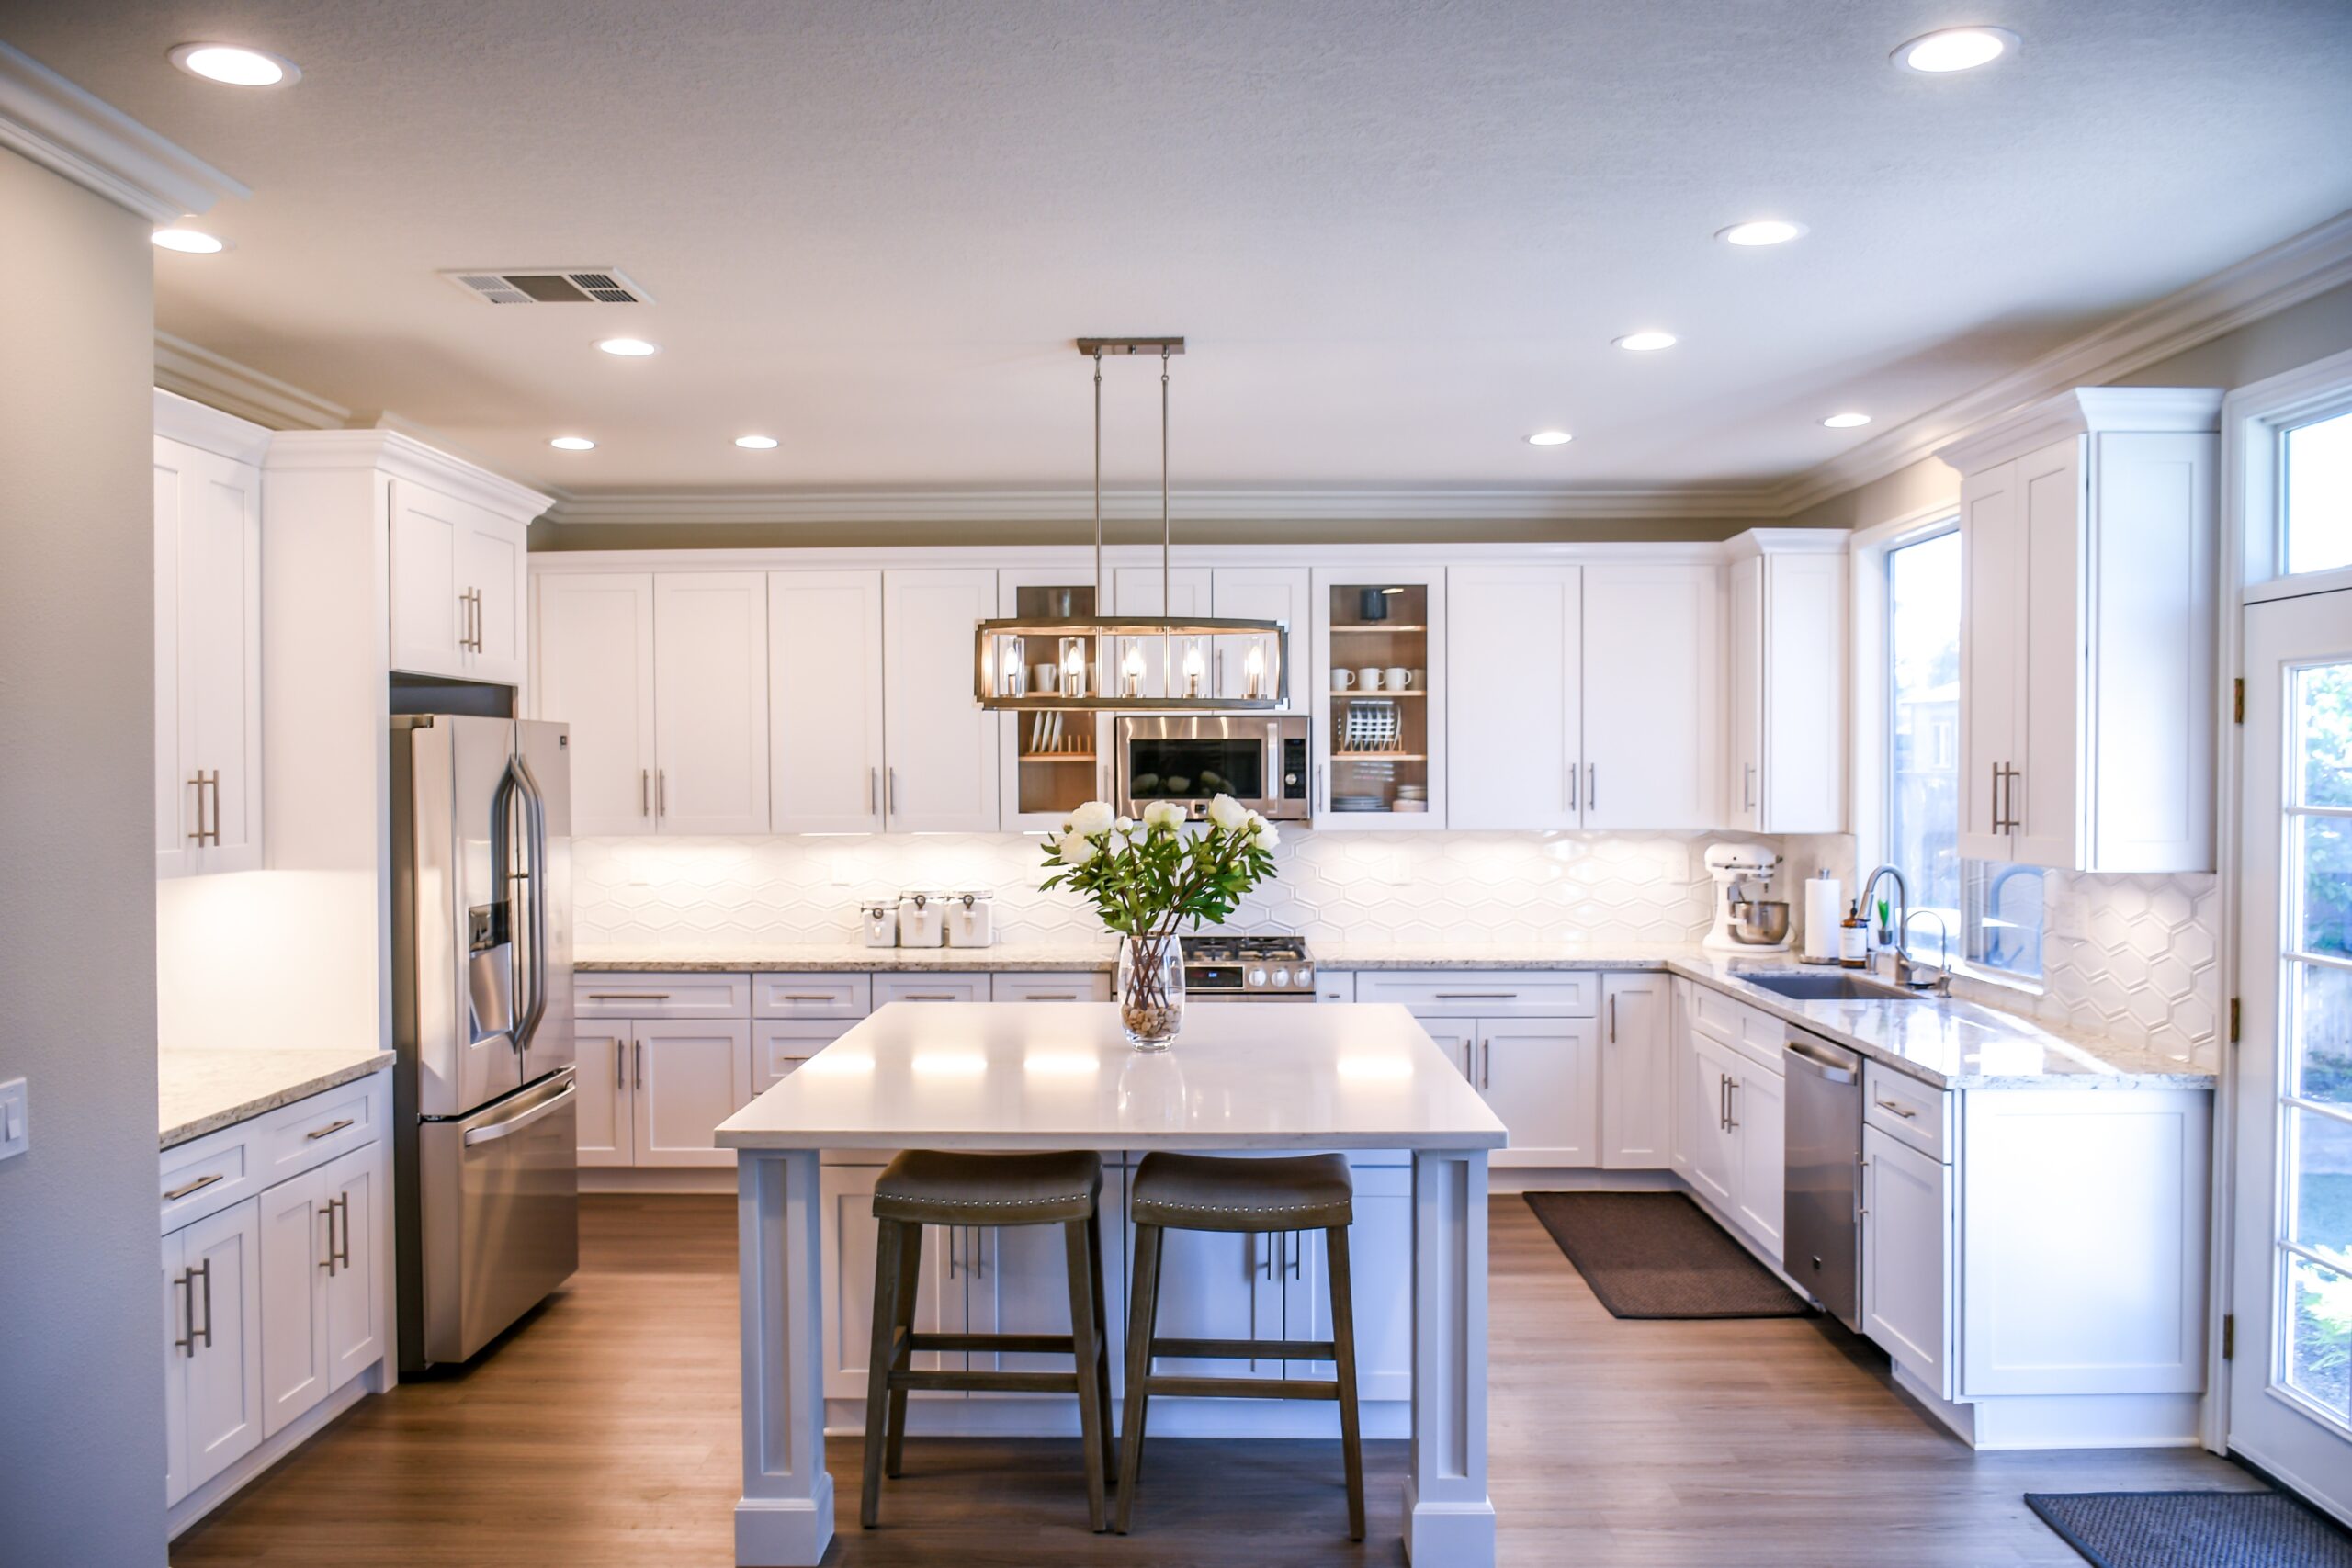 Consider the Lighting Needs of Your Kitchen